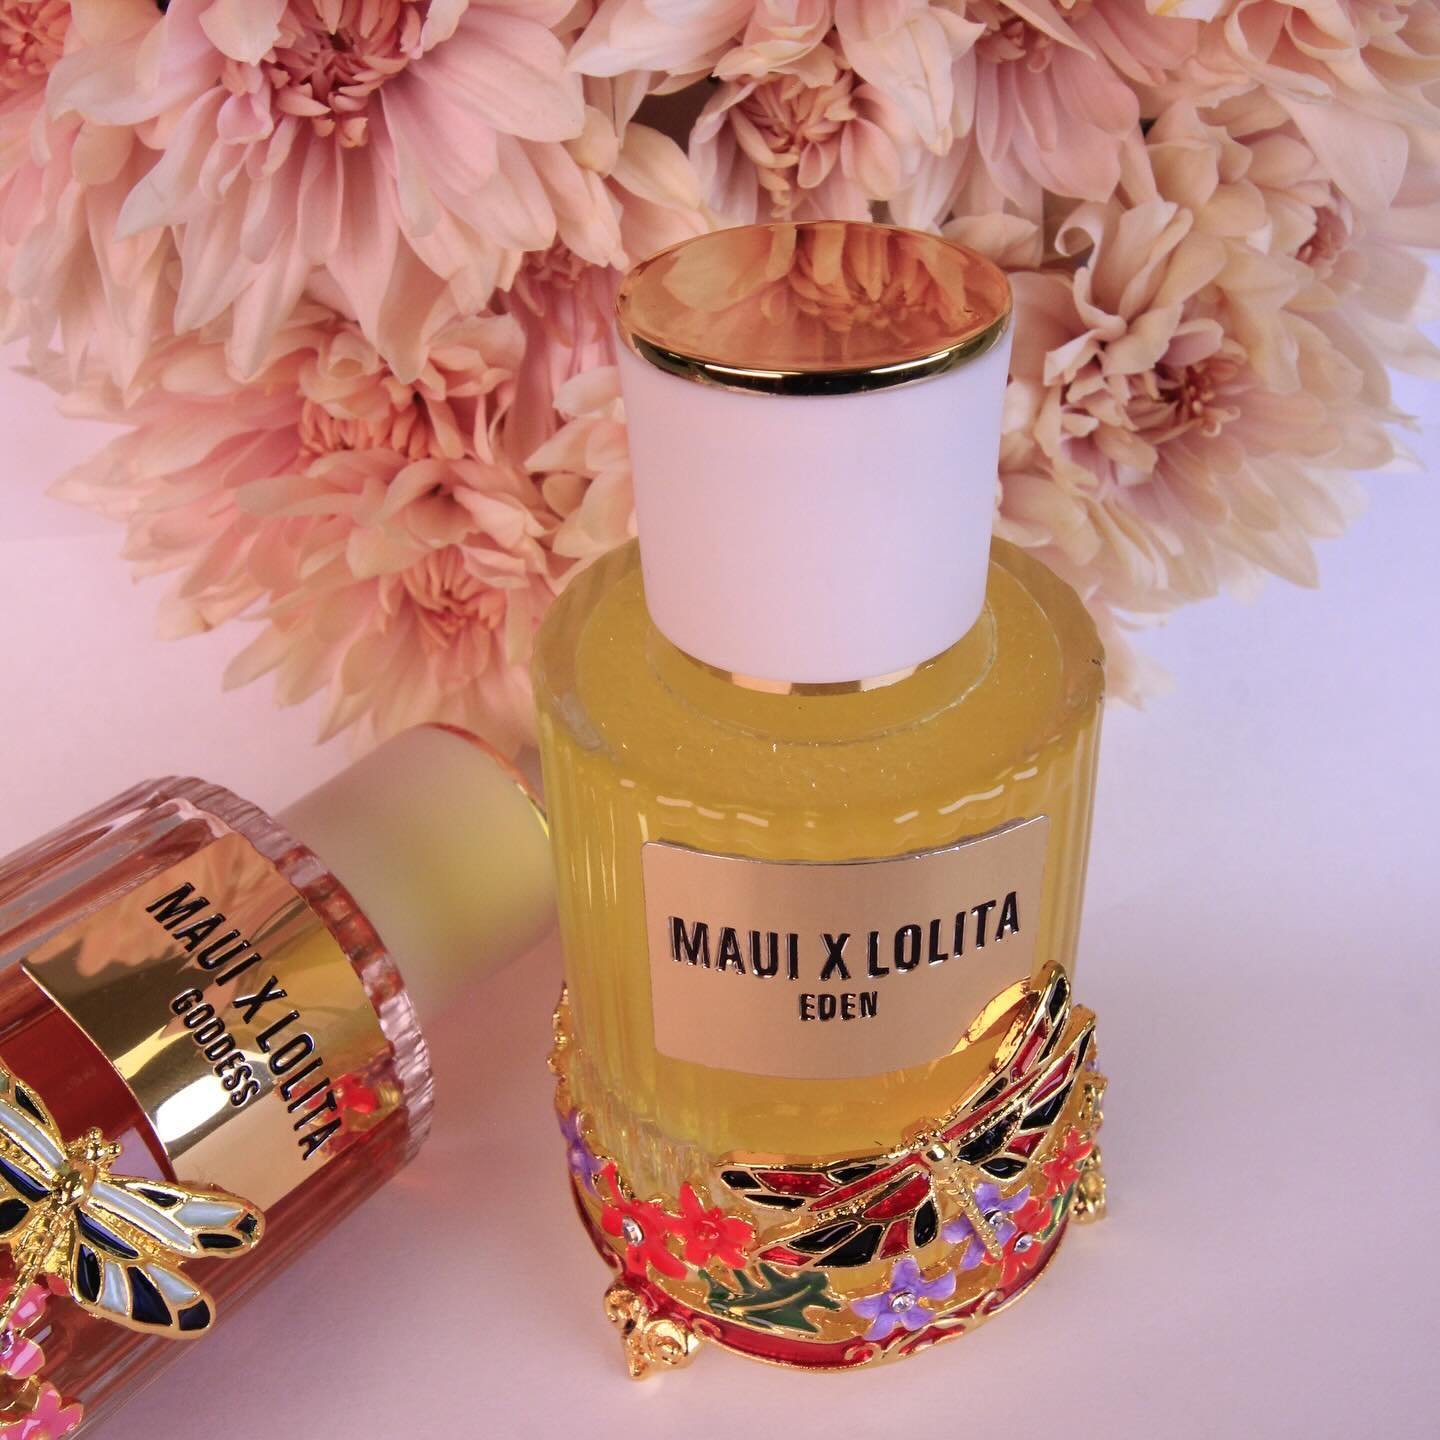 @thesnobette featured @mauibylolita and their latest Fragrance drop on the site, chatting with mom and daughter Co-Founders Maui and Lolita Malone about how the collection is inspired by their travels abroad ✈️